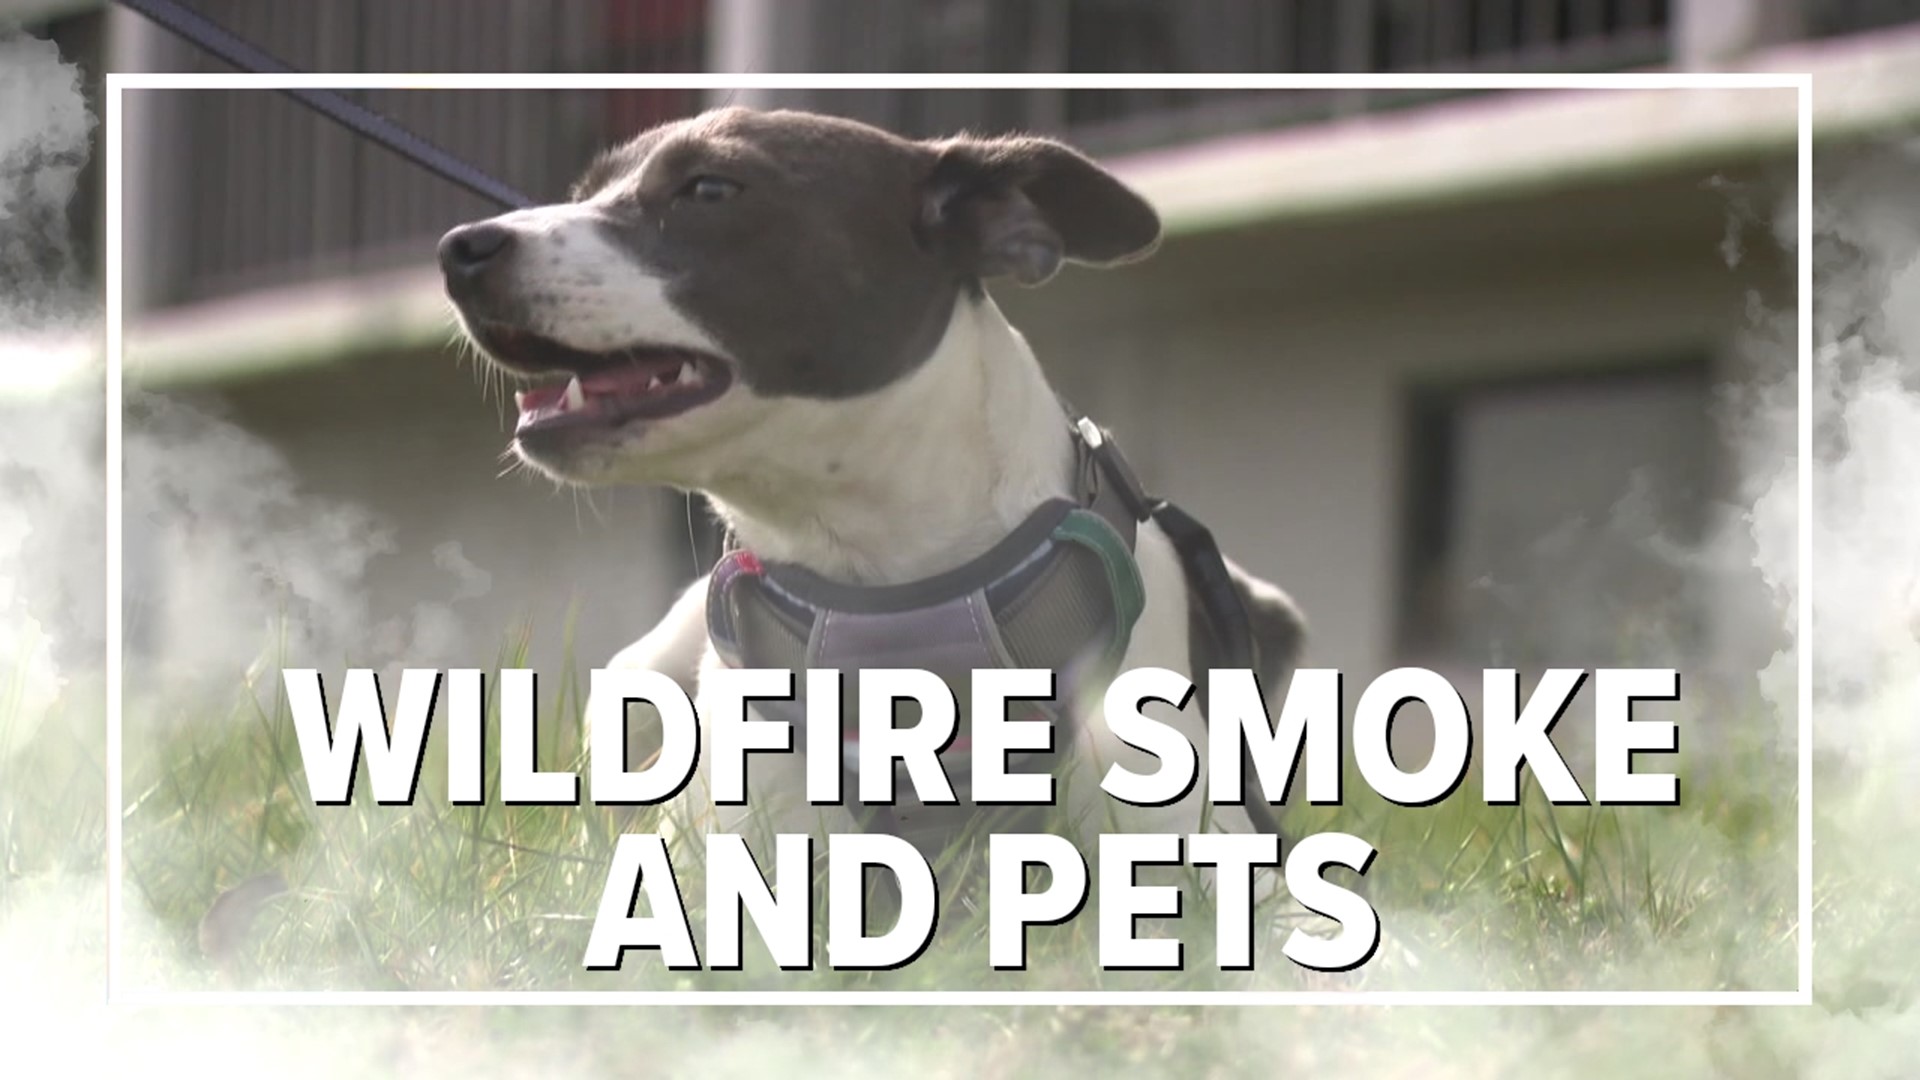 Newswatch 16's Chris Keating spoke with a veterinarian about the best ways to take care of your furry friend while smoke is in the air.